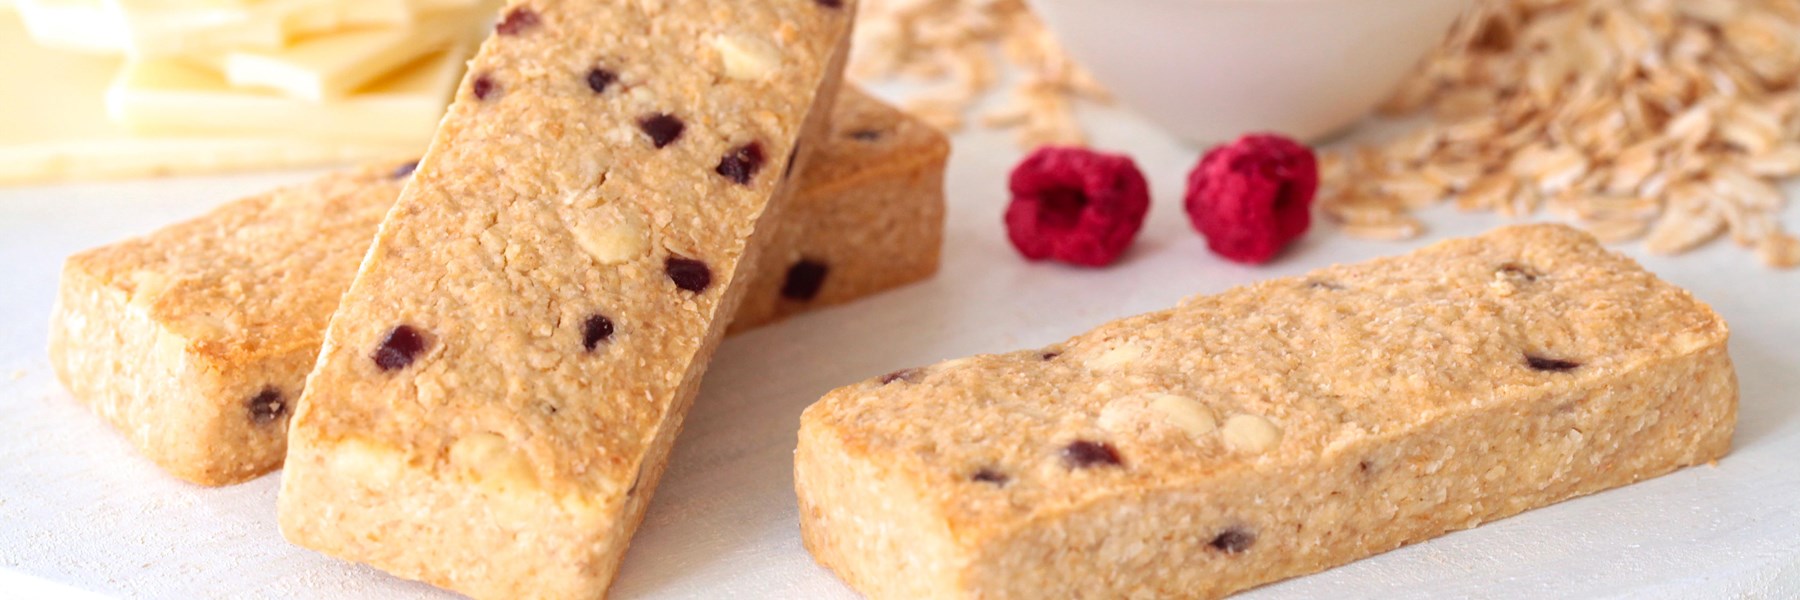 Our delicious Baked Oaty Slices taste just like homemade! See the full range here